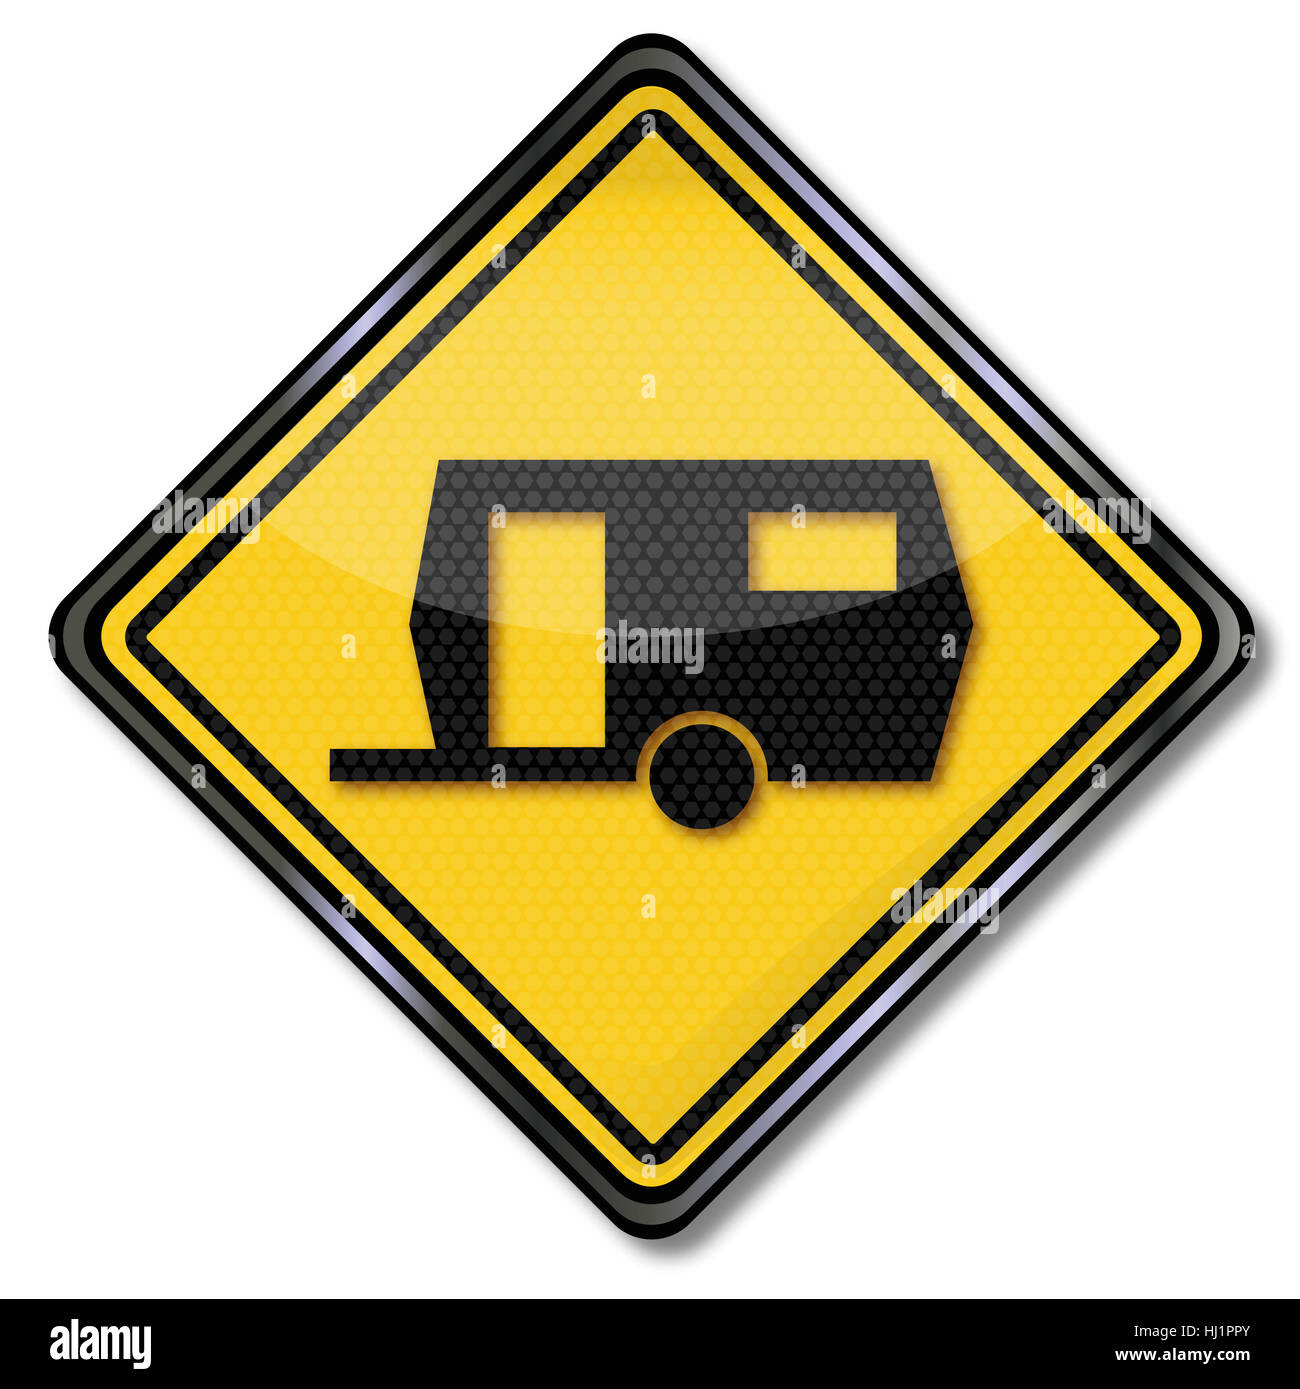 camping, cosiness, camping ground, shield, plate, danger, holiday, vacation, Stock Photo